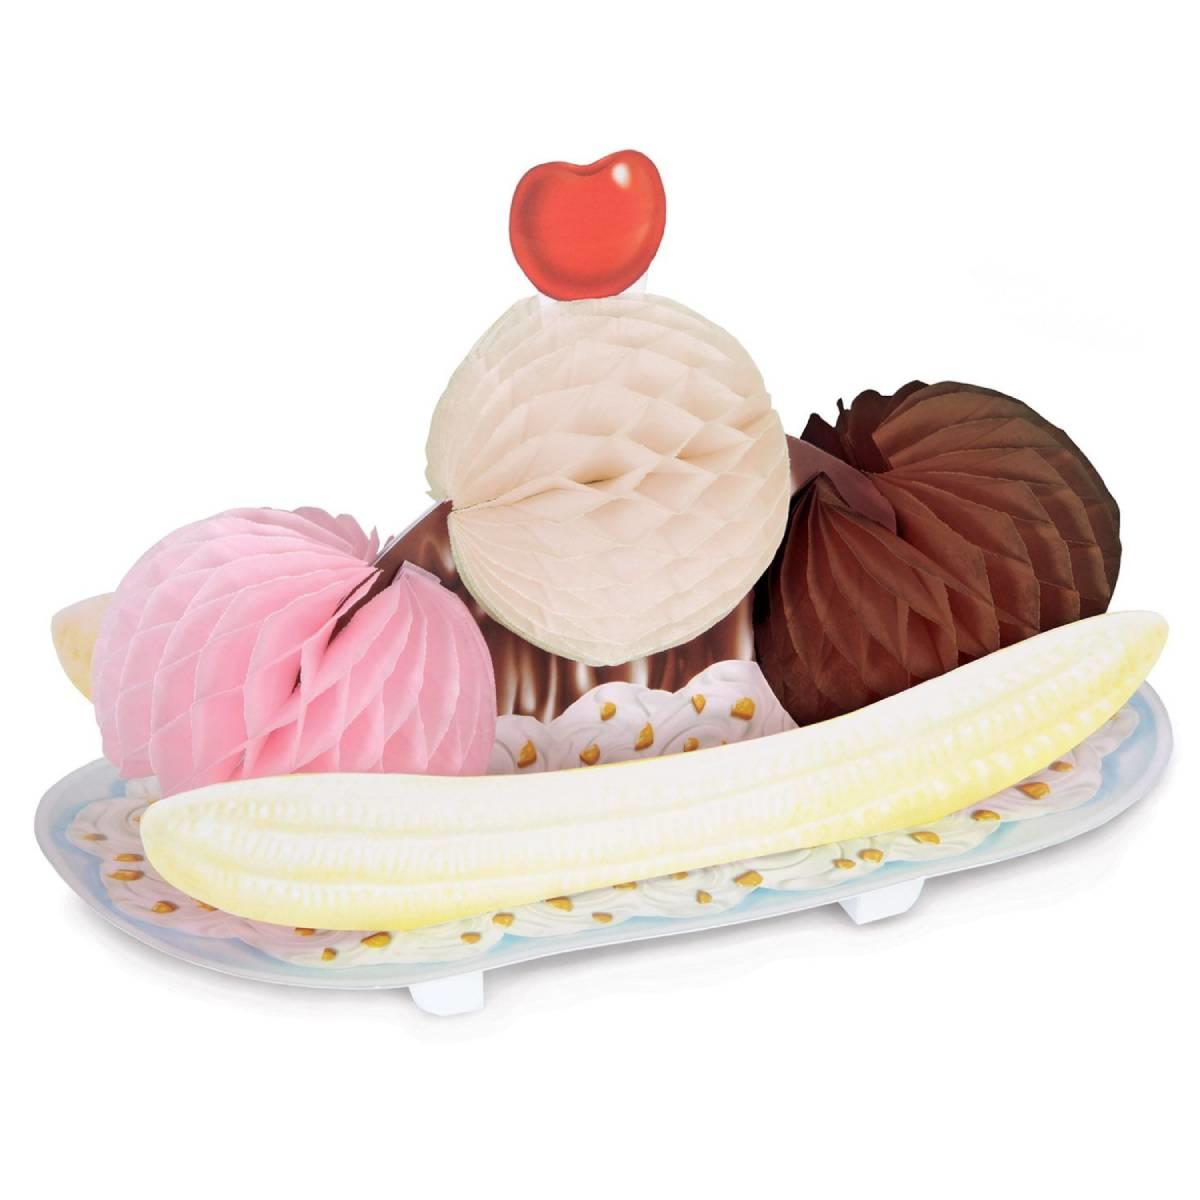 Banana Split Ice Cream Sundae Honeycomb Decoration by Beistle 54552 available here at Karnival Costumes online party shop